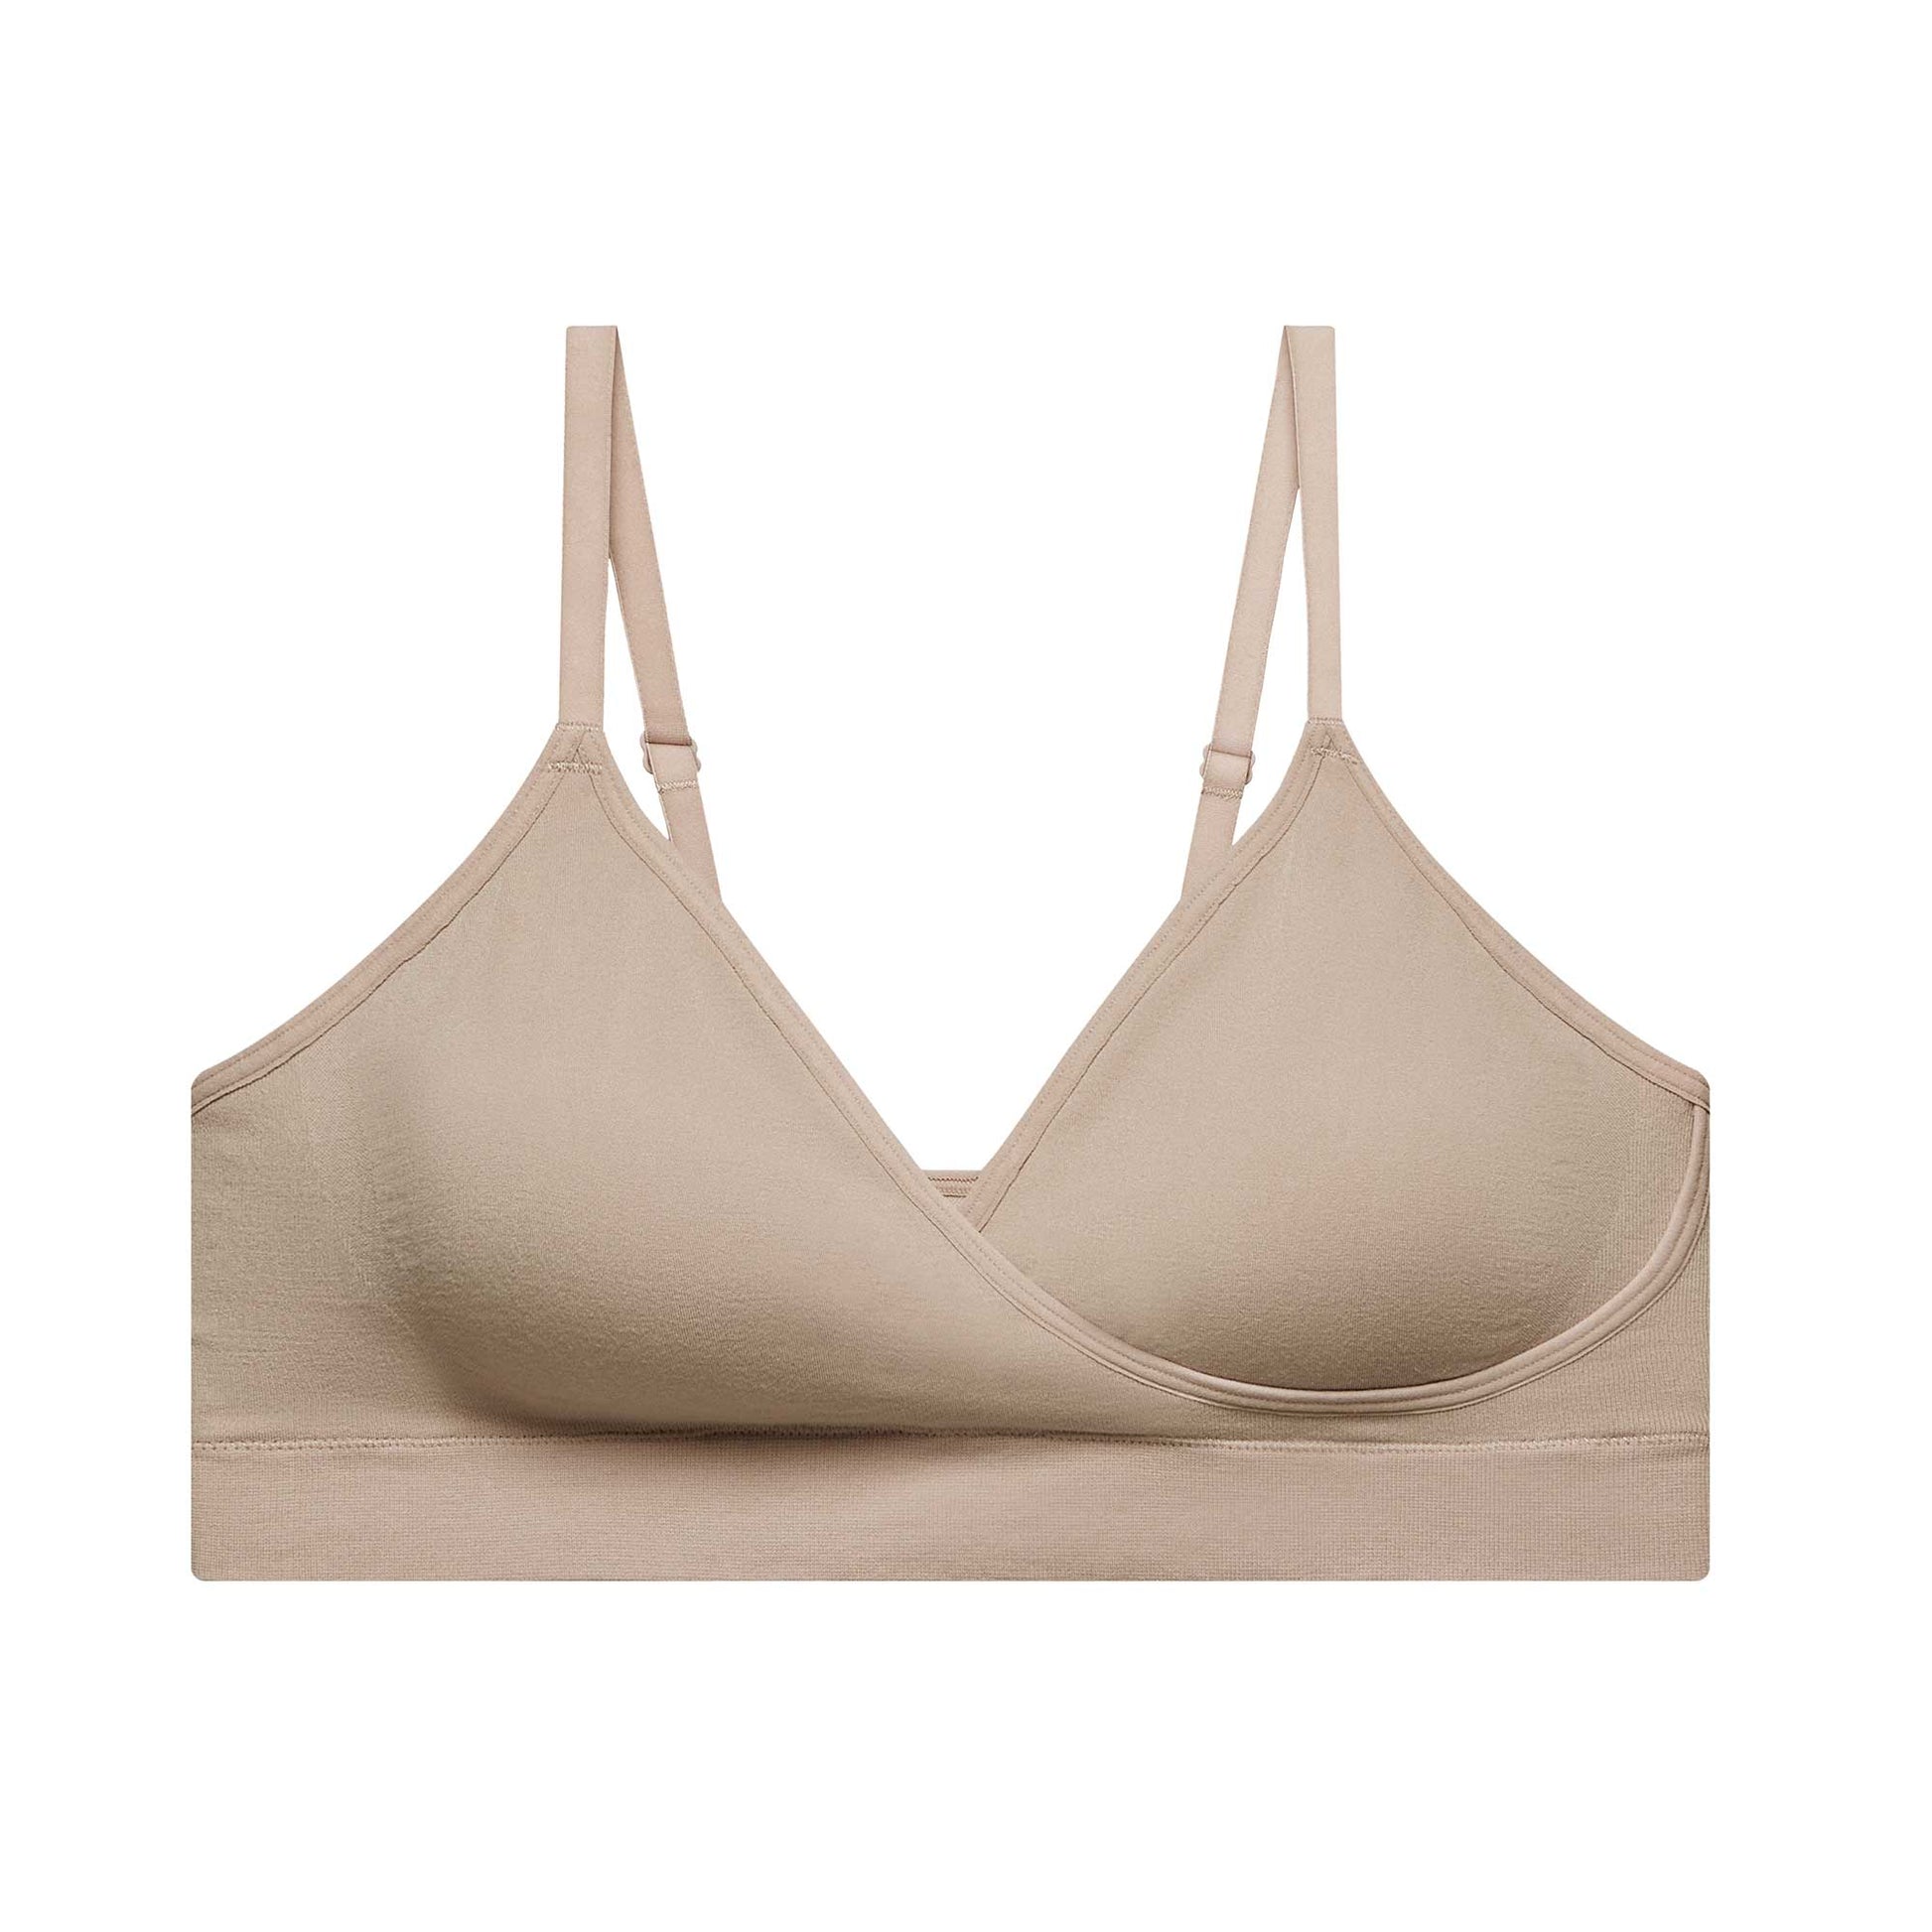 Modern Wired-Free Crossover Maternity Bra NY124 (Stretchable) Cotton Lining  – Sweet Mommy Enterprise